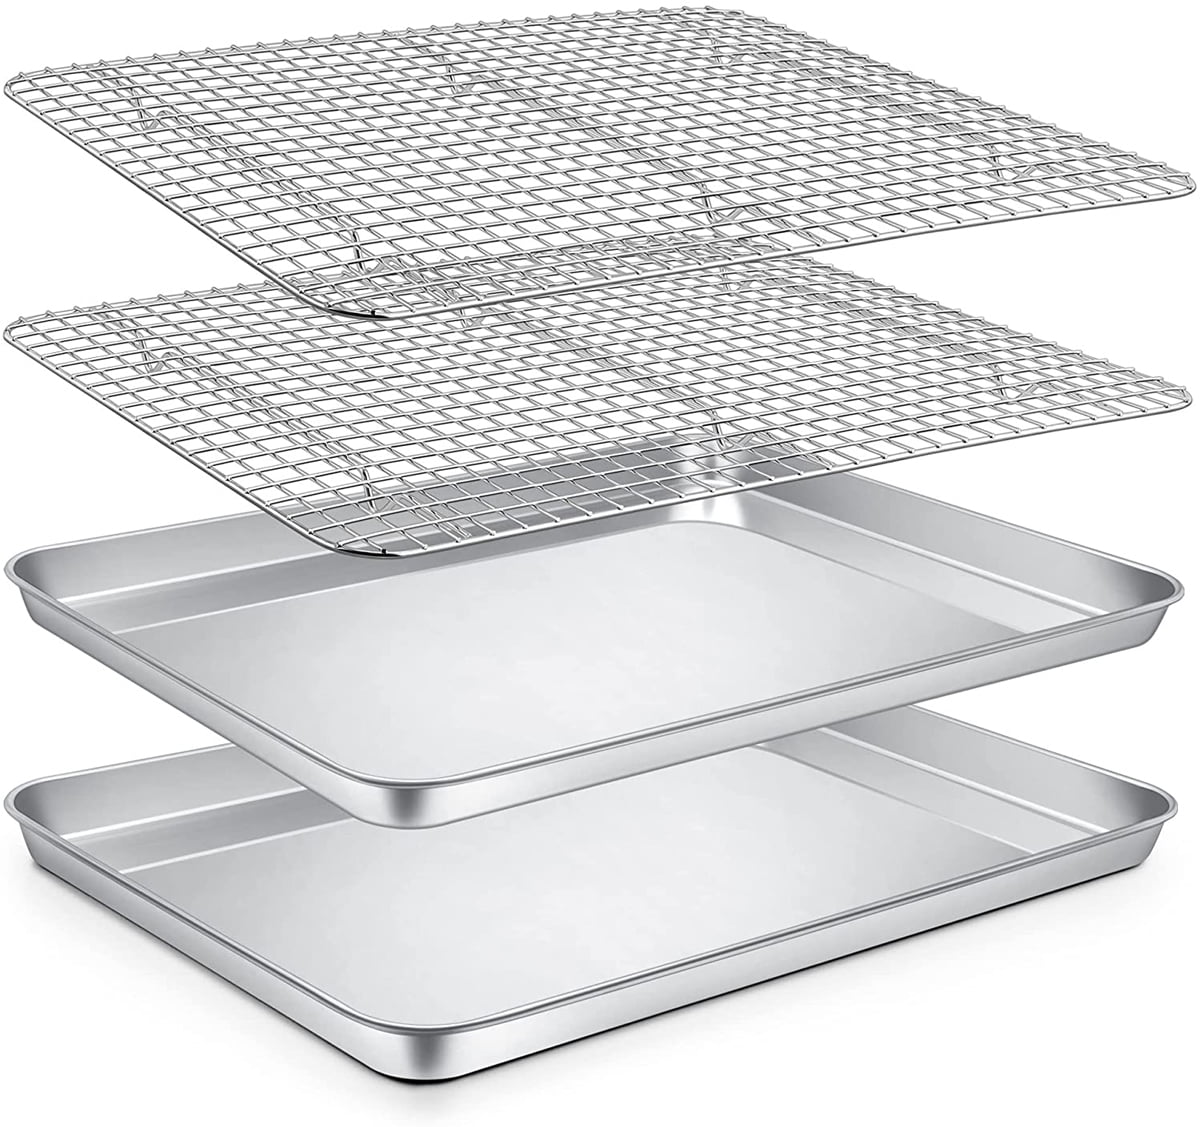 Stainless Steel Baking Sheet with Rack Set, E-far 16”x12” Cookie Sheet Pan  for Oven, Rimmed Metal Tray with Wire Cooling Rack for Cooking Roasting